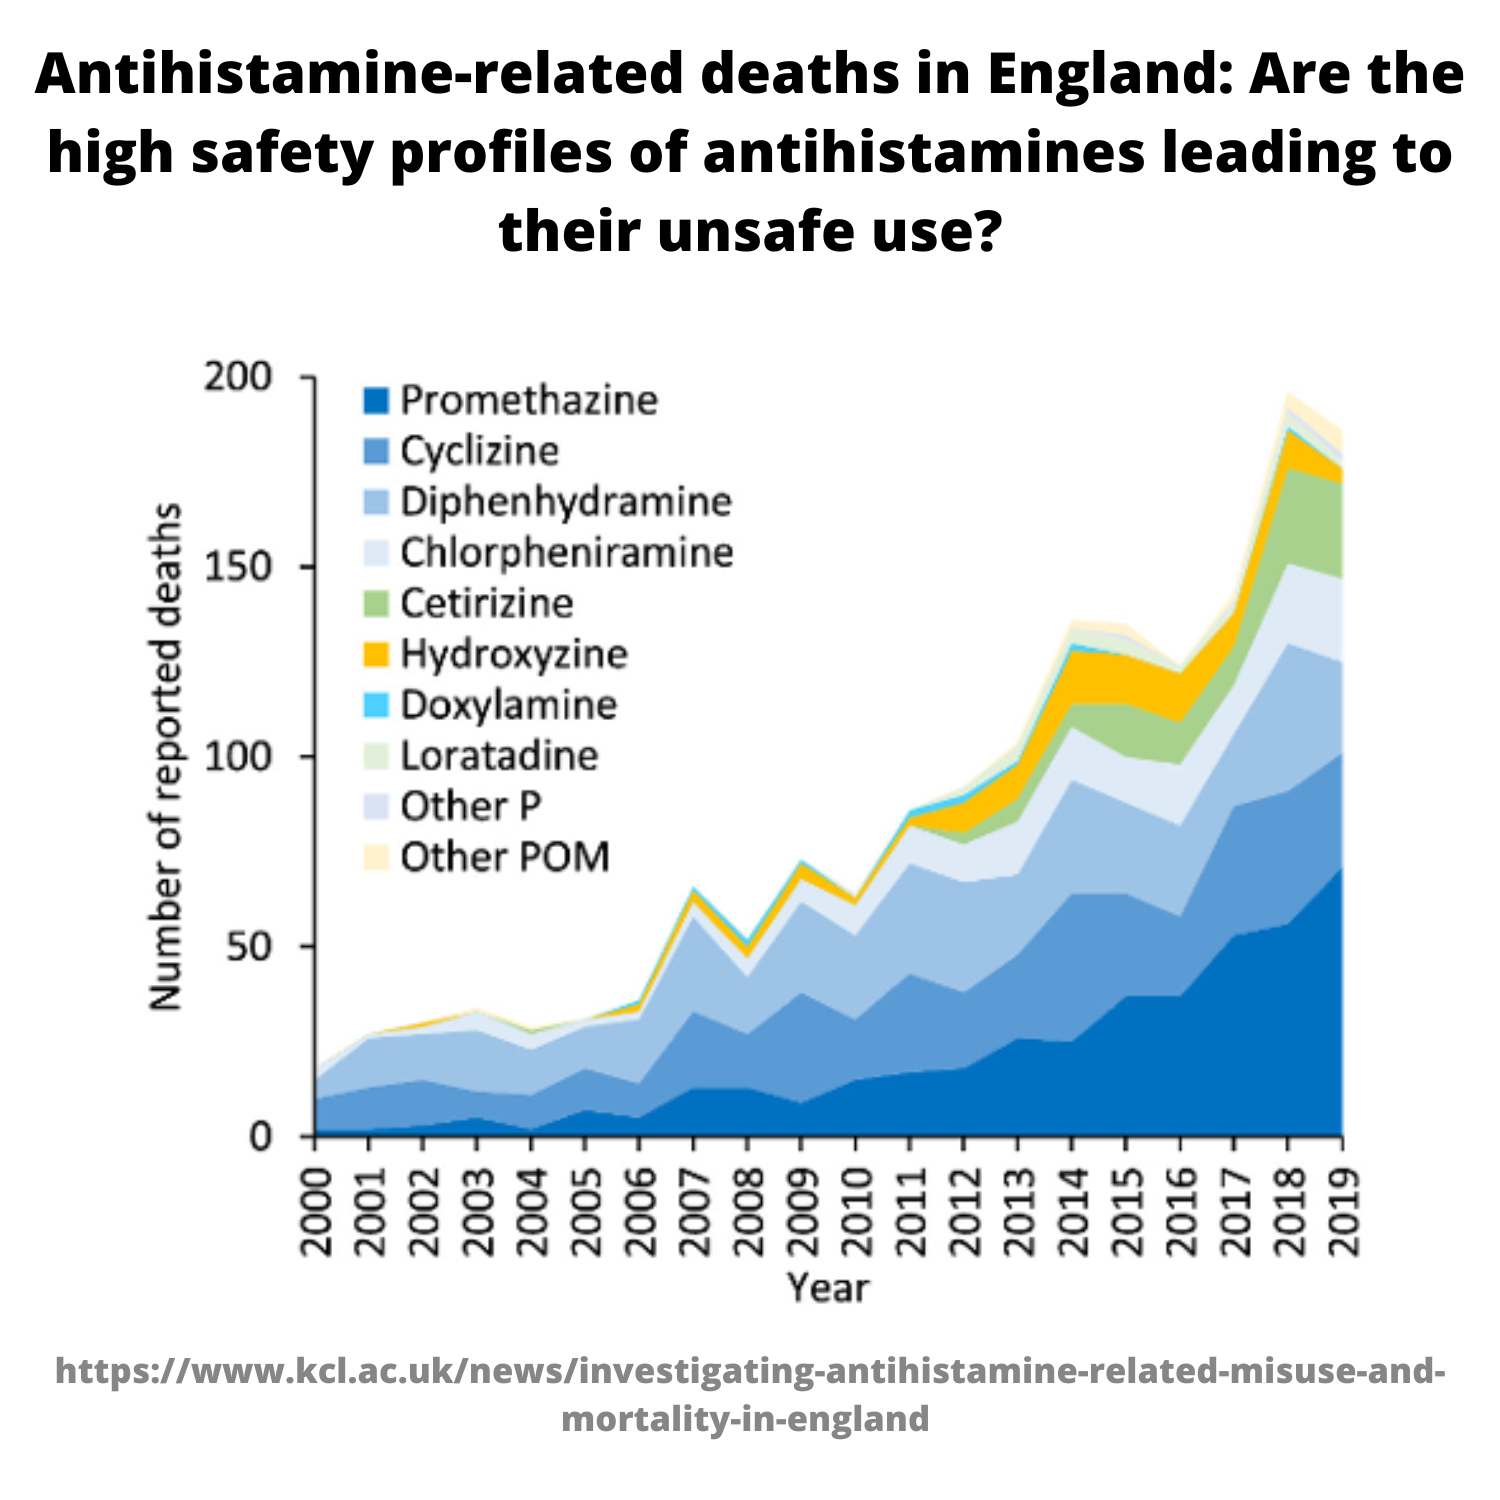 Antihistamine-related deaths in England: Are the high safety profiles of antihistamines leading to their unsafe use?